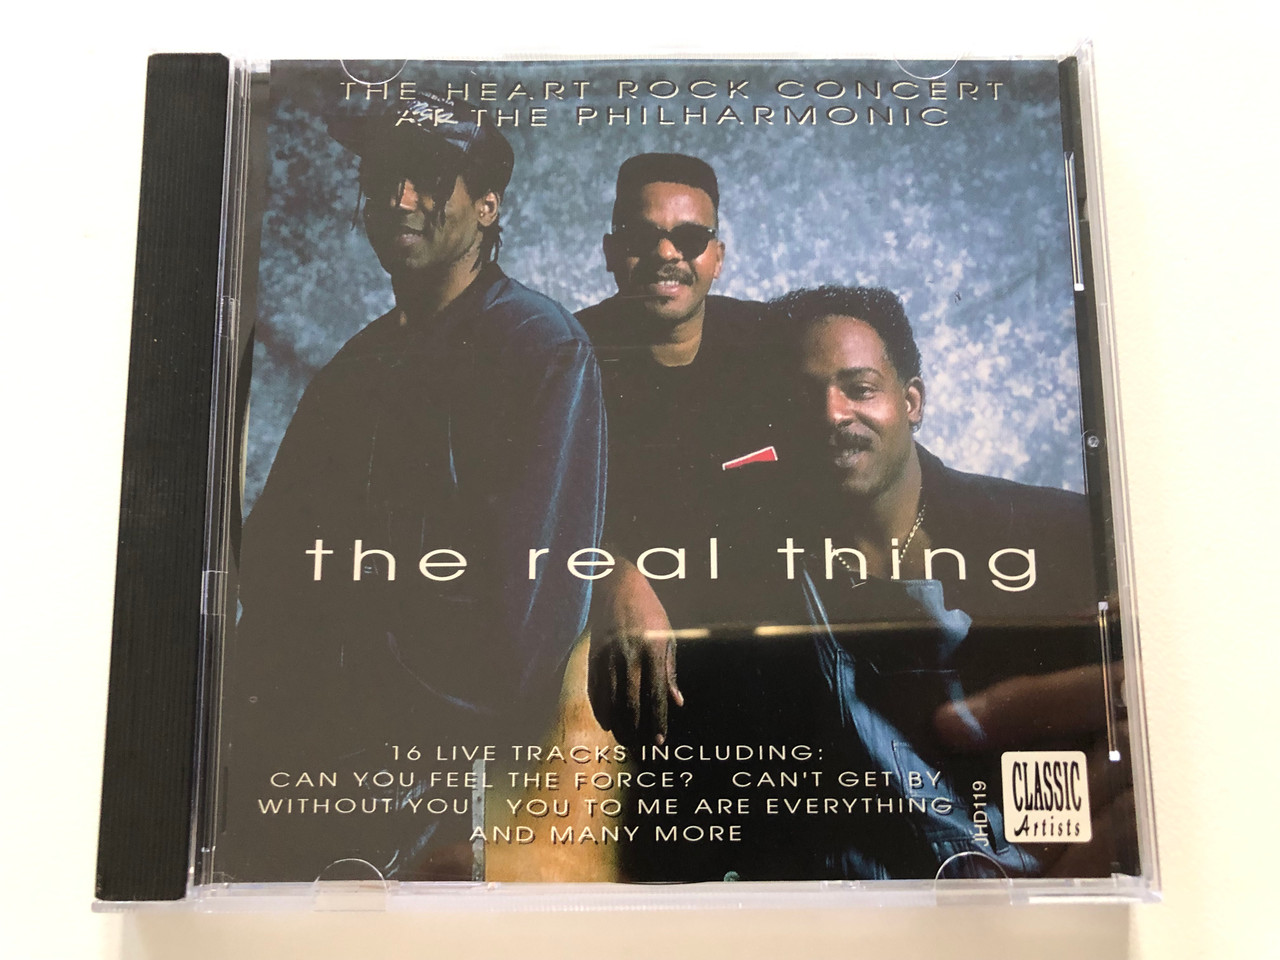 https://cdn10.bigcommerce.com/s-62bdpkt7pb/products/30961/images/182557/The_Real_Thing_The_Heart_Rock_Concert_At_The_Philharmonic_16_Live_Tracks_Including_Can_You_Feel_The_Force_Cant_Get_By_Without_You_You_To_Me_Are_Everything_and_many_more_Tring_Internat_1__06456.1624603463.1280.1280.JPG?c=2